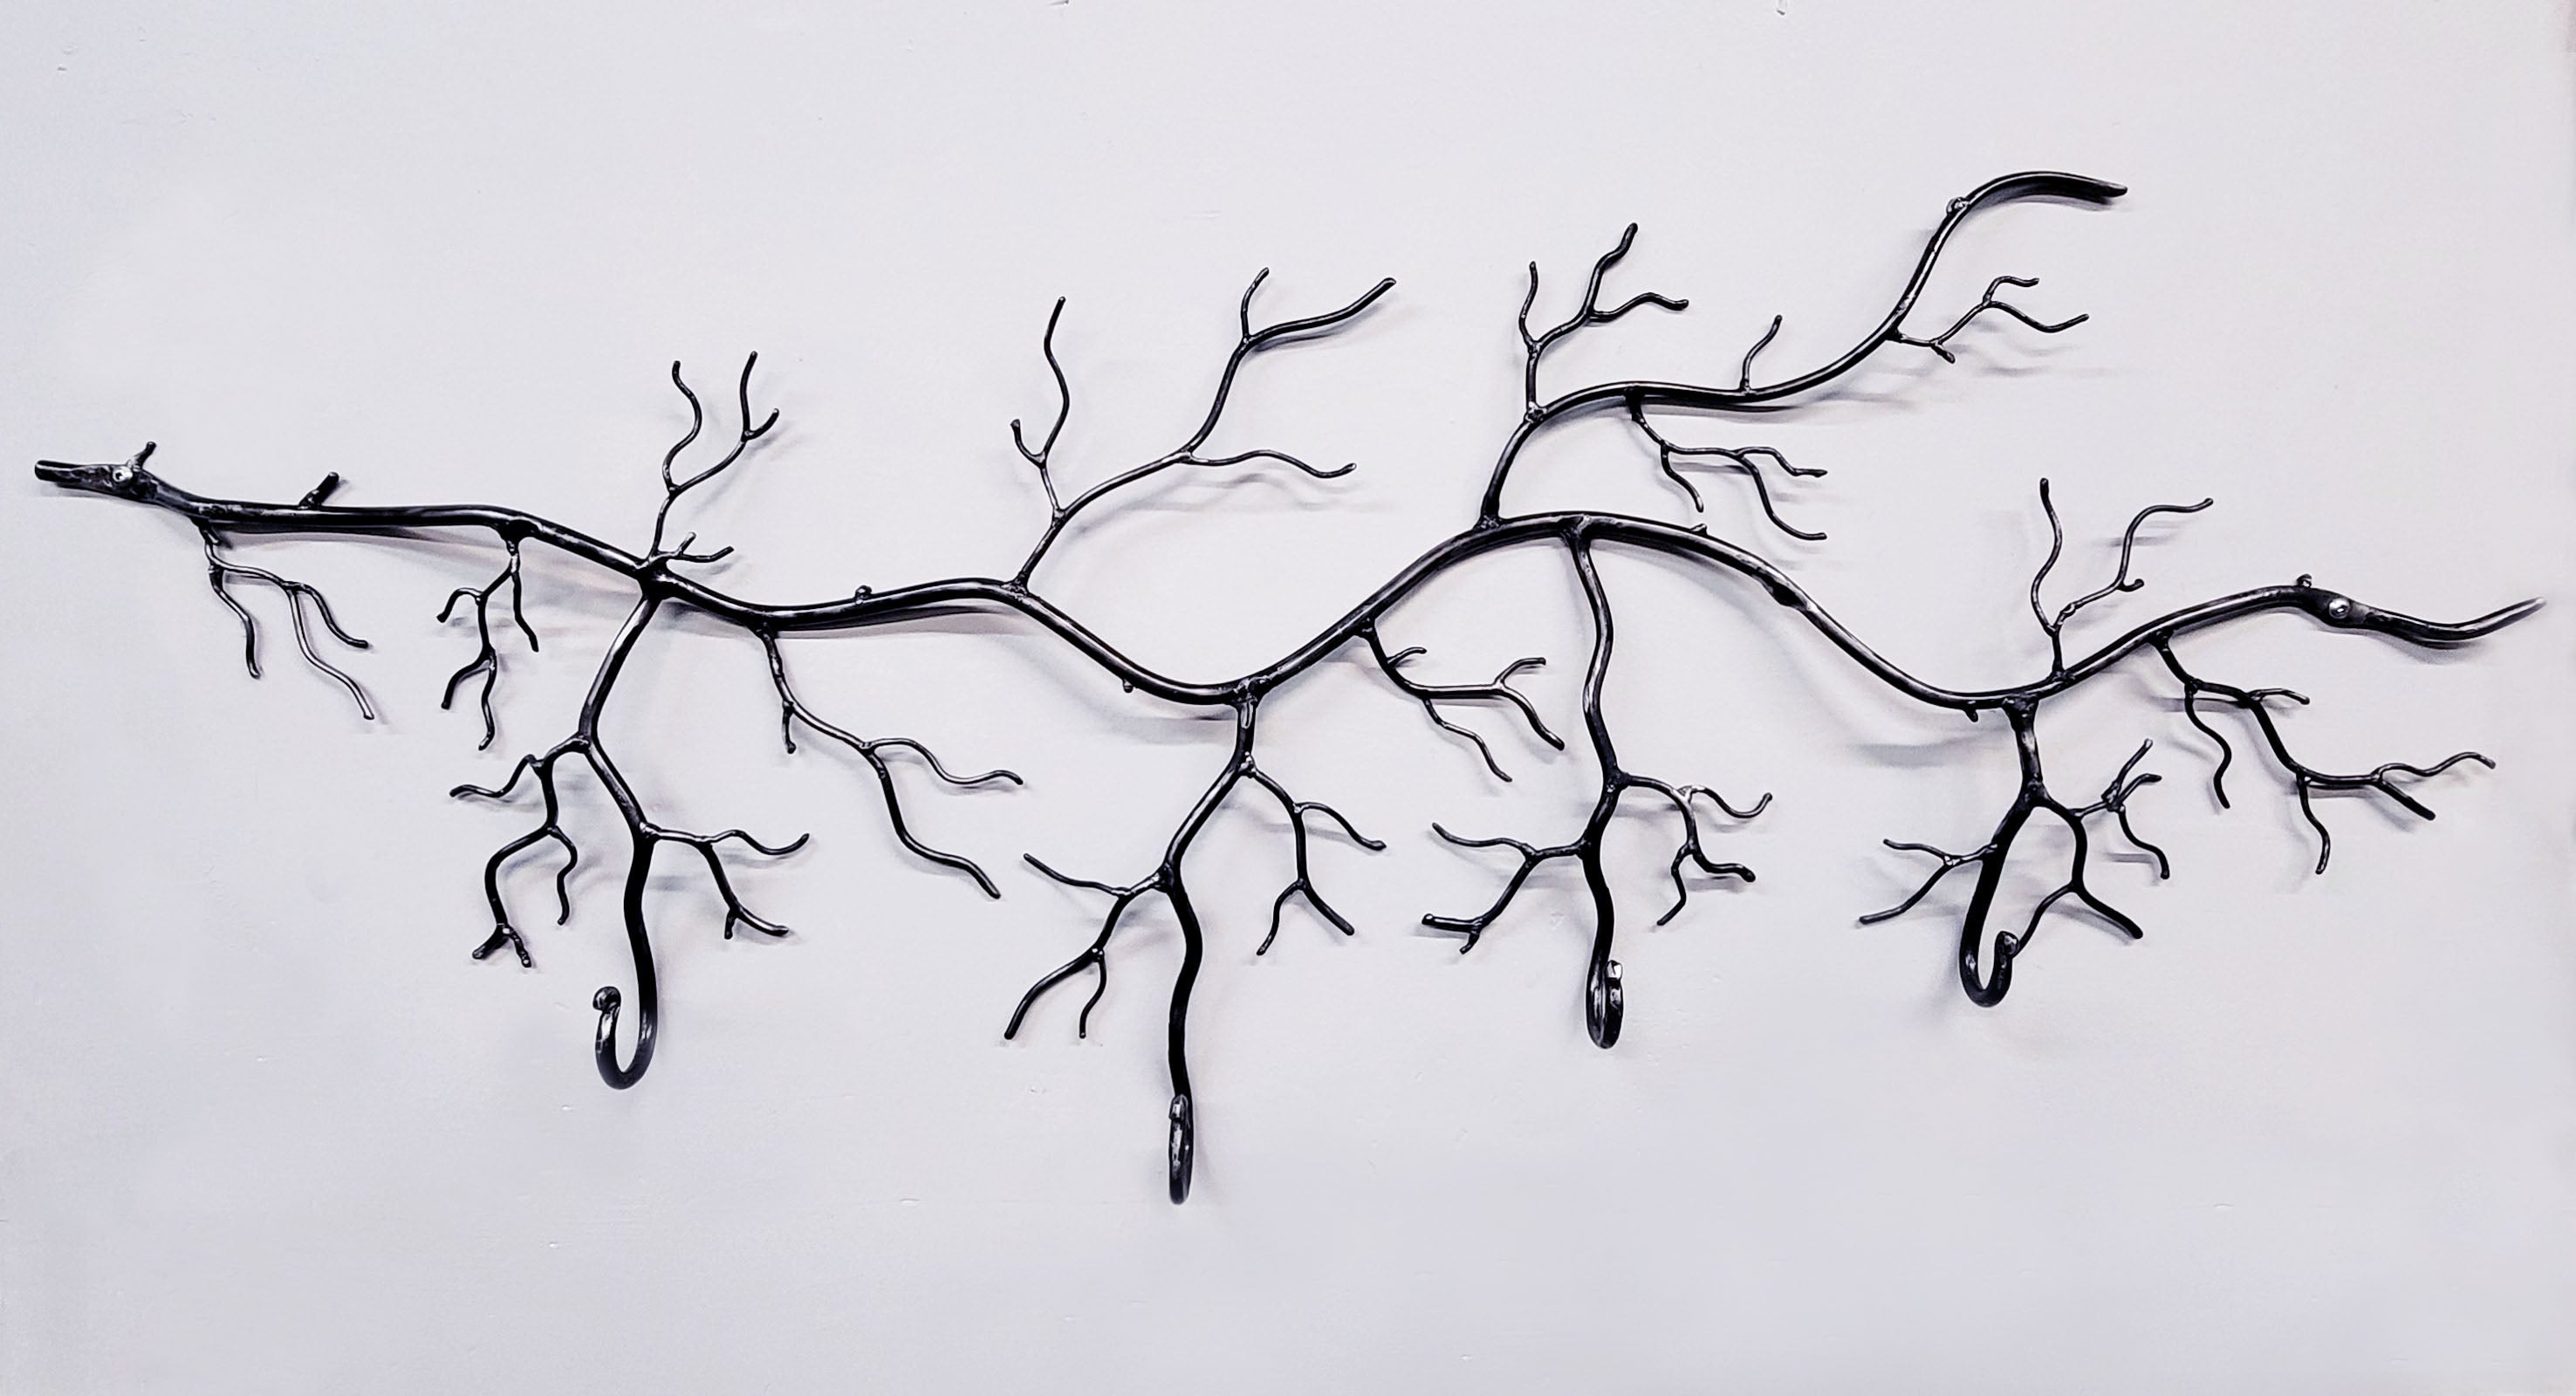 Large Tree Branch with 4 Hooks